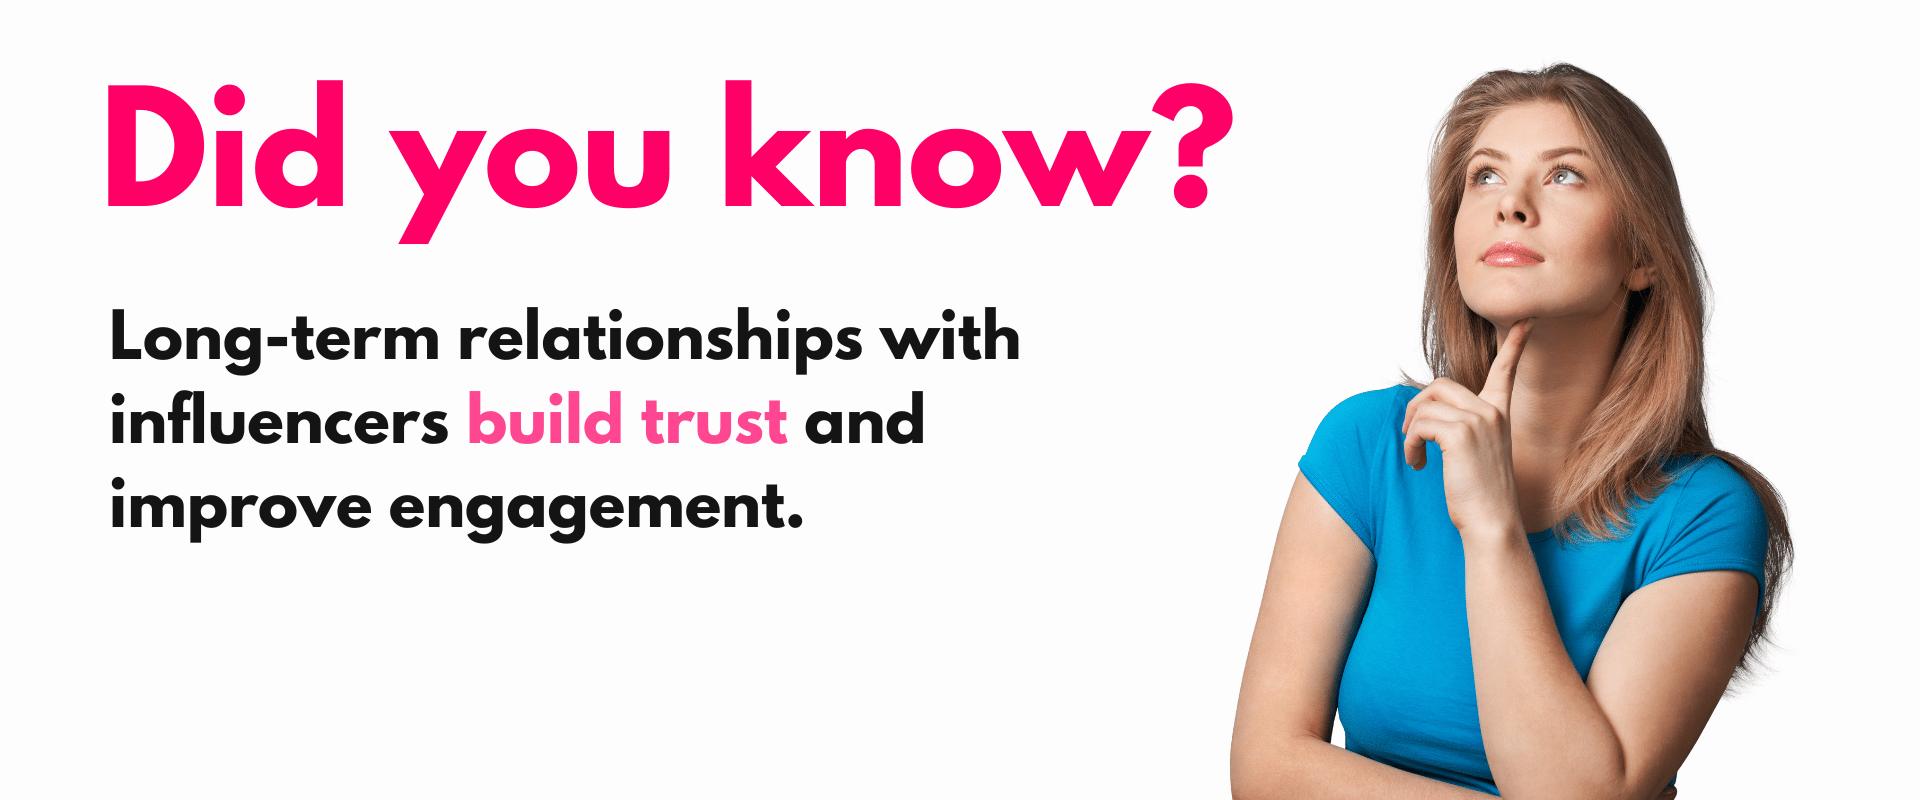 Long term relationships with influencers build trust and improve engagement.